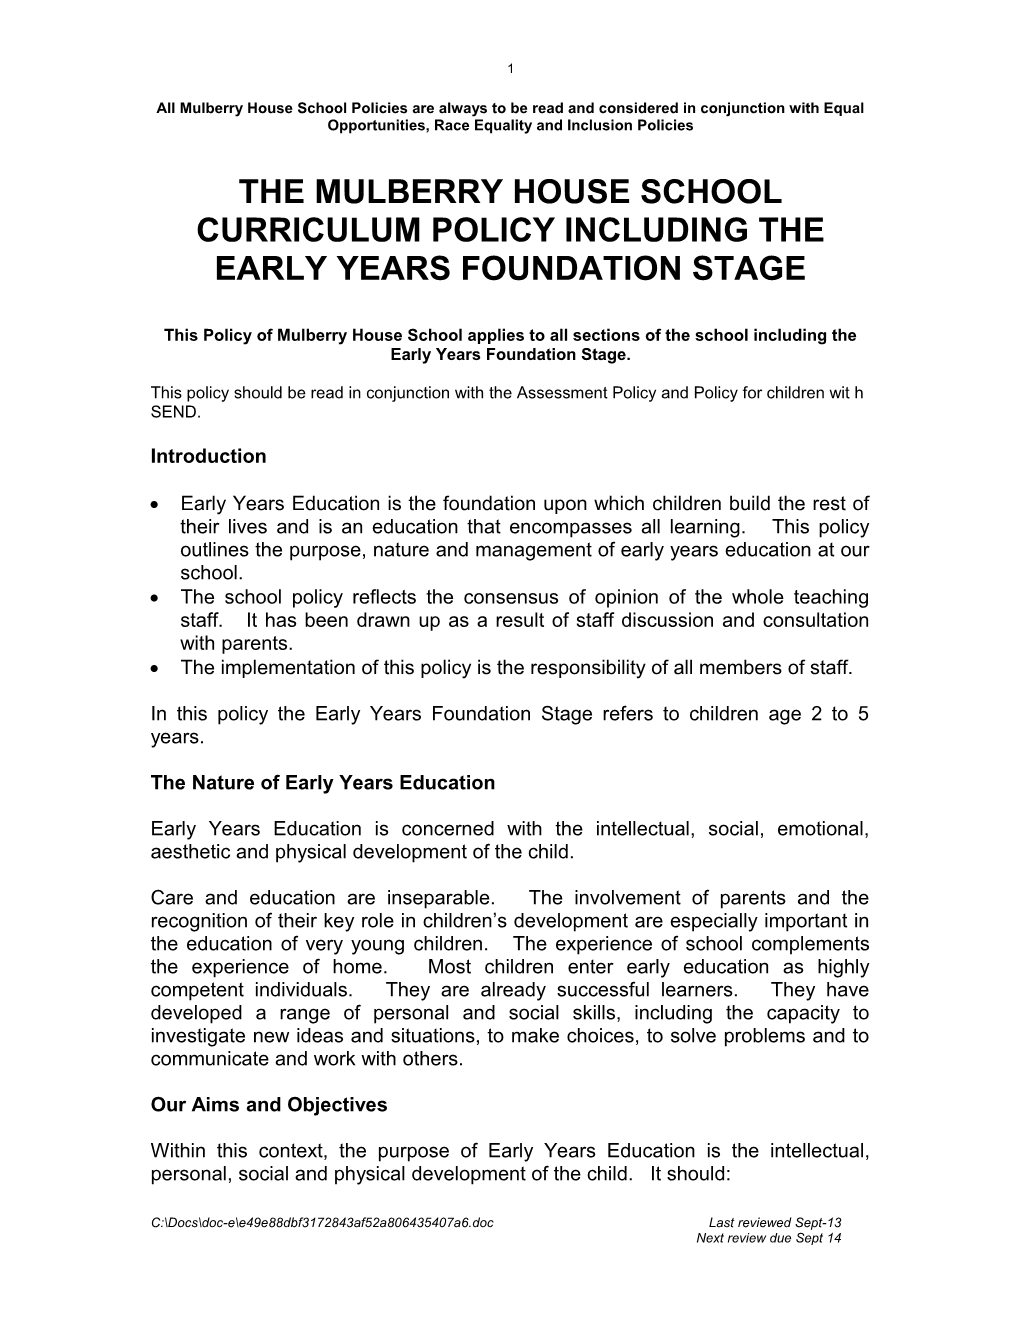 Early Years Curriculum Policy